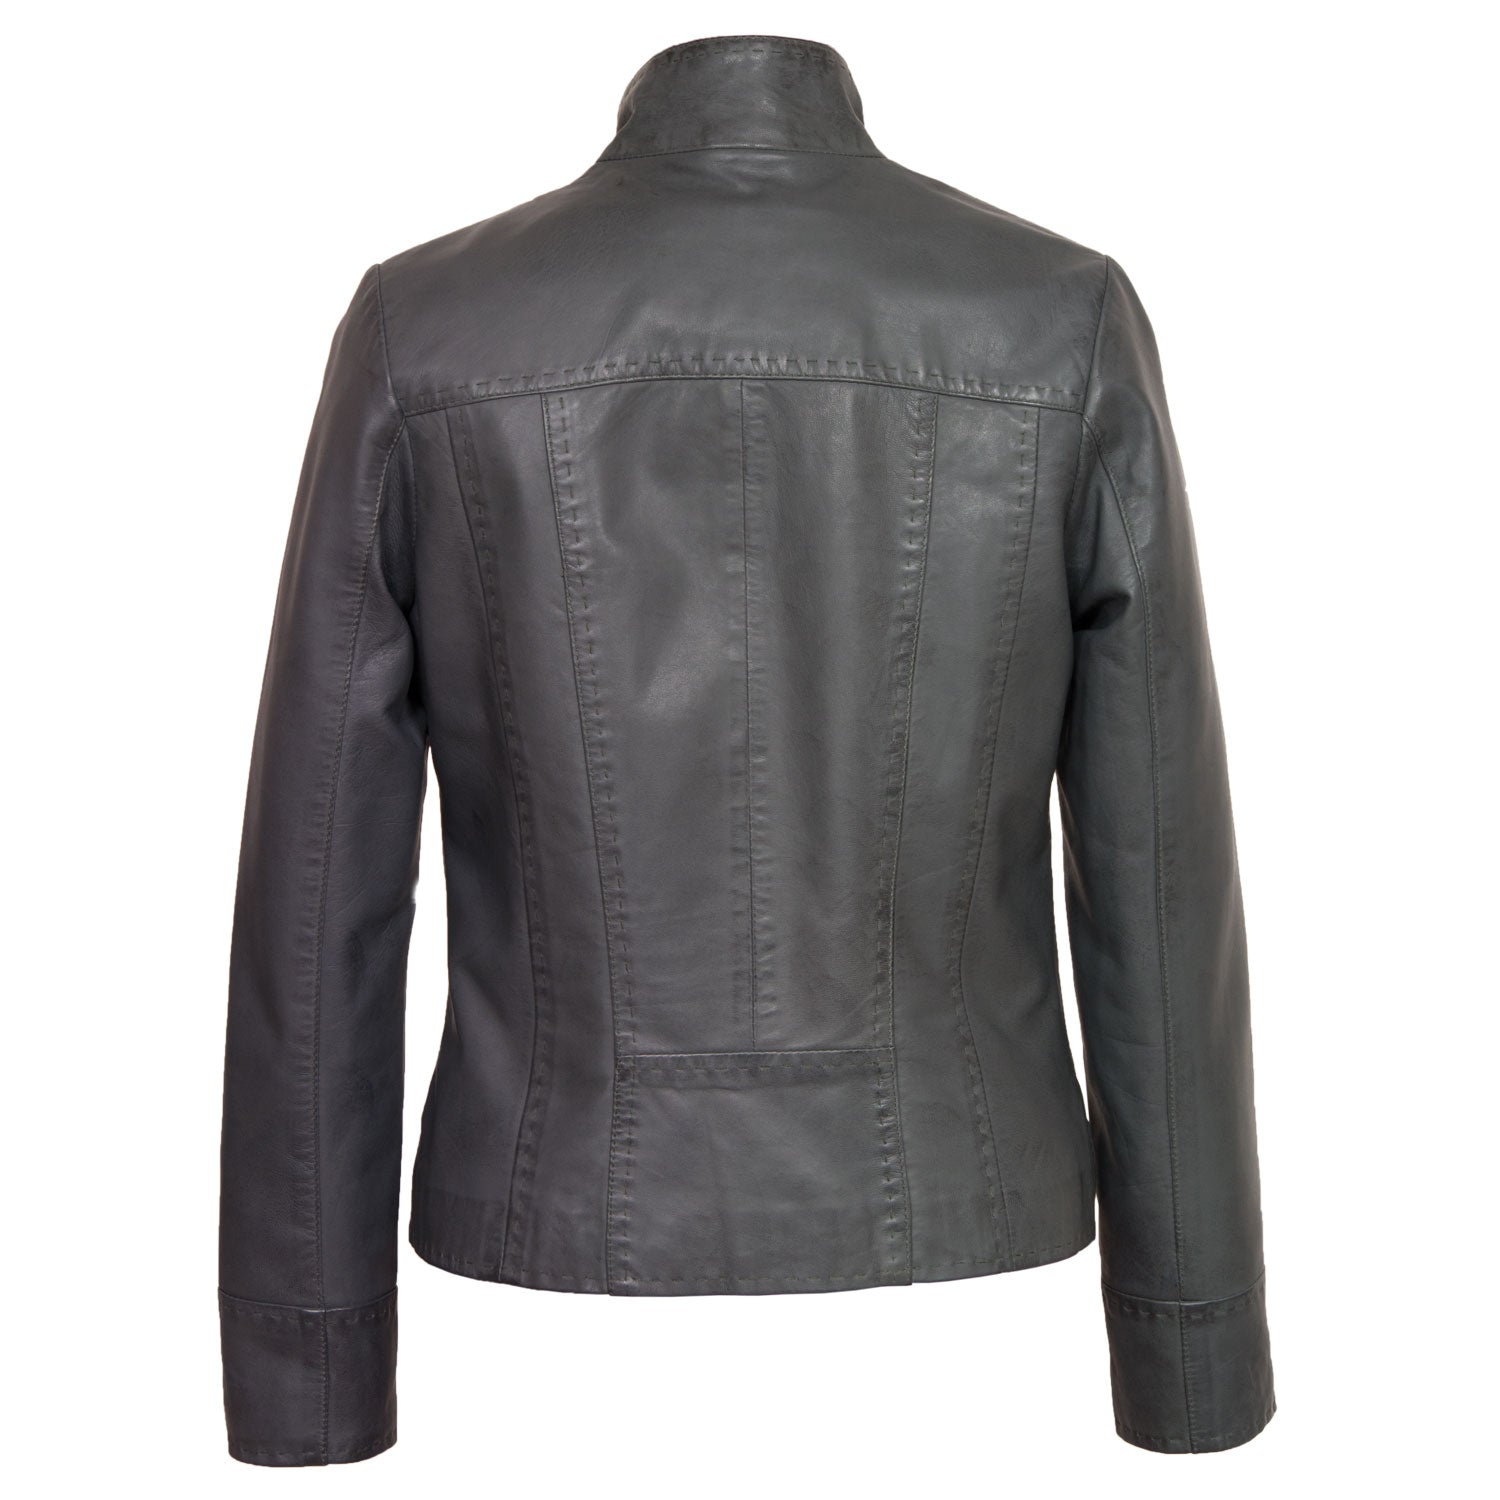 May: Women's Grey Leather Jacket